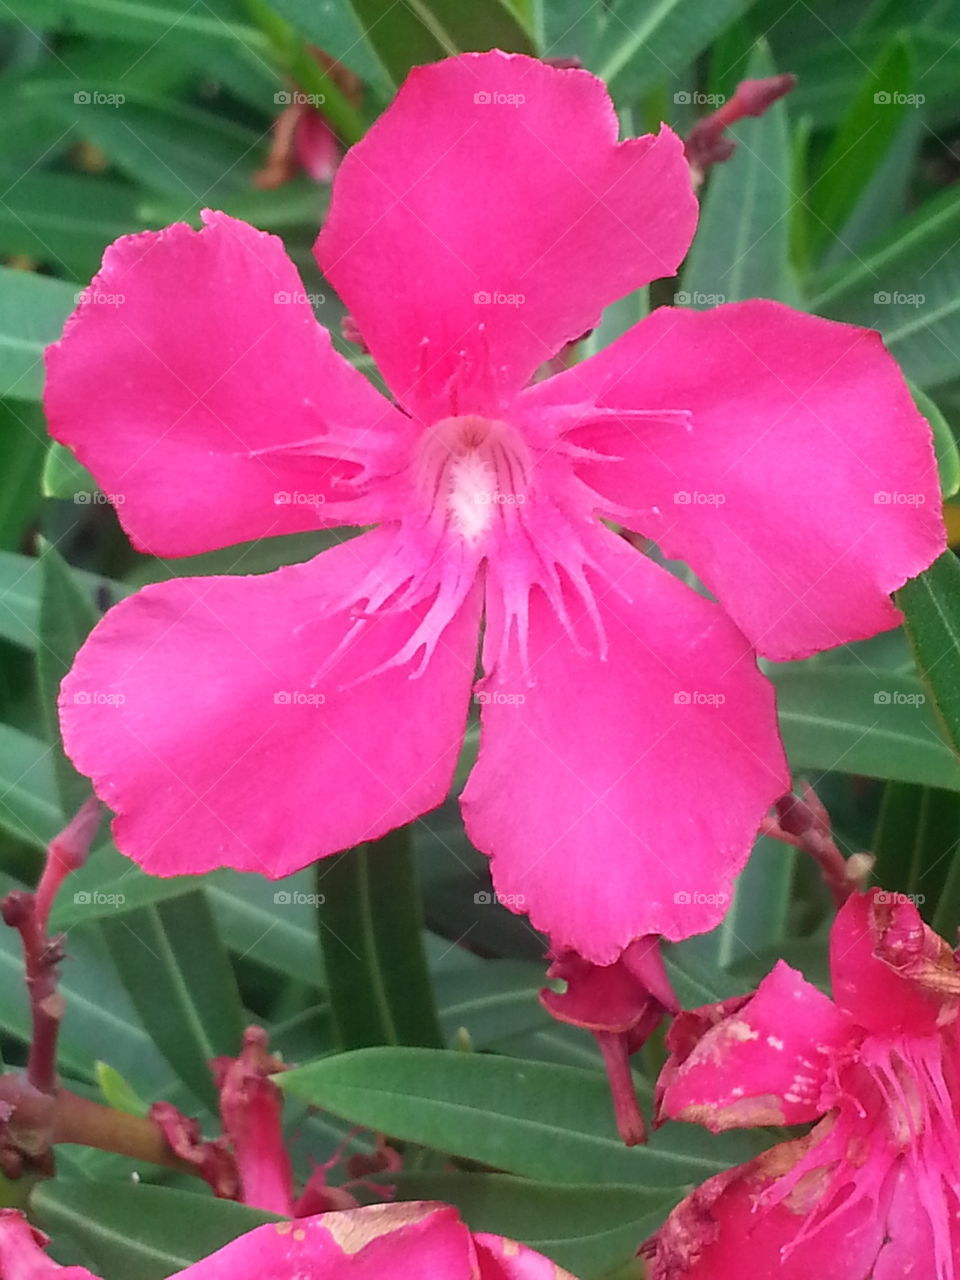 A beautiful pink flower here in Florida which I cannot remember the name of.